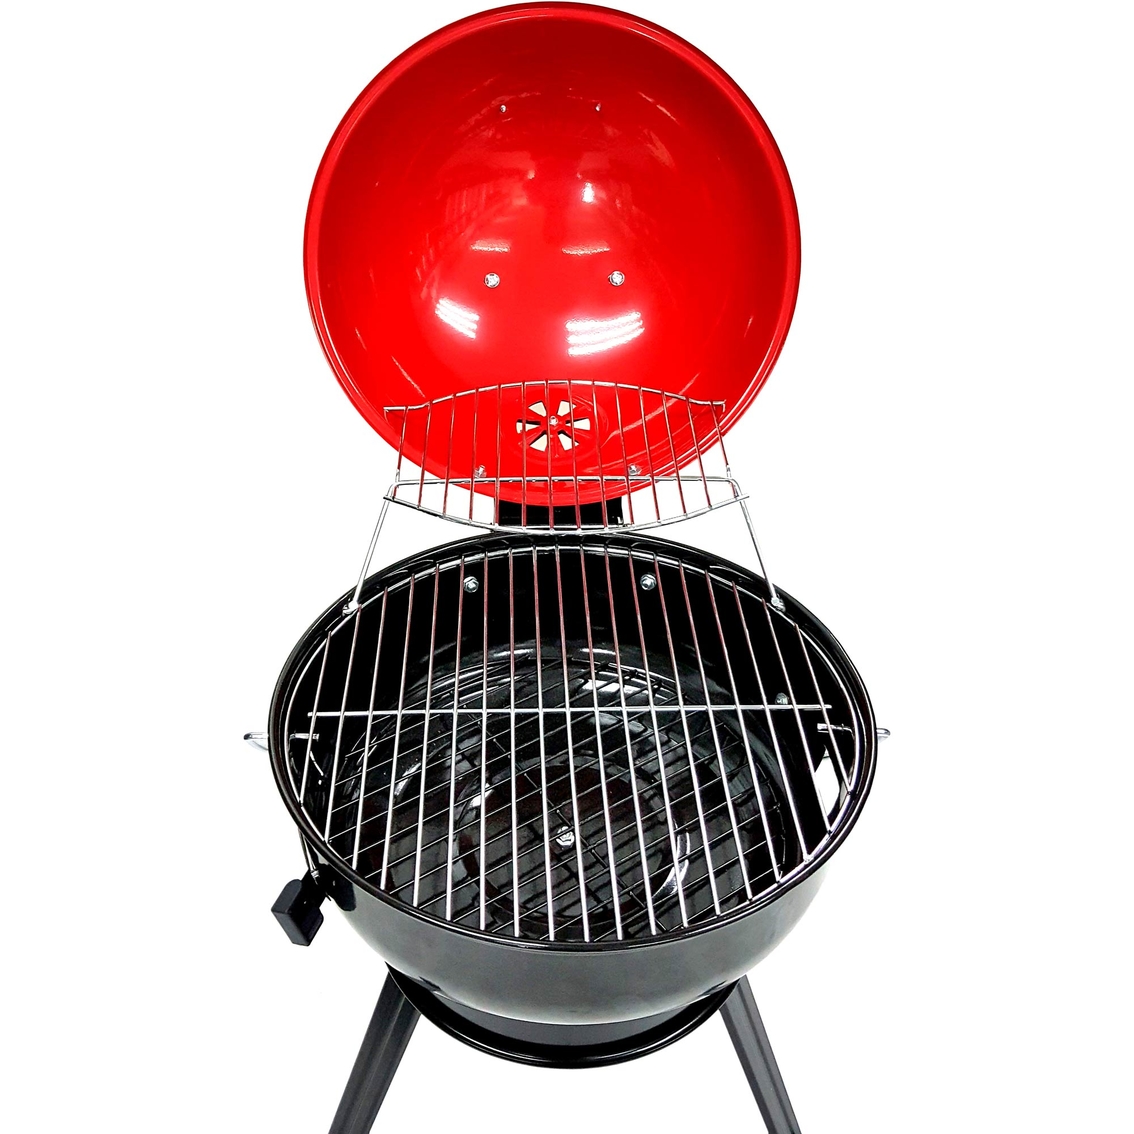 Kingsford 14 In. Charcoal Grill With Hinge Lid | Grills & Smokers 